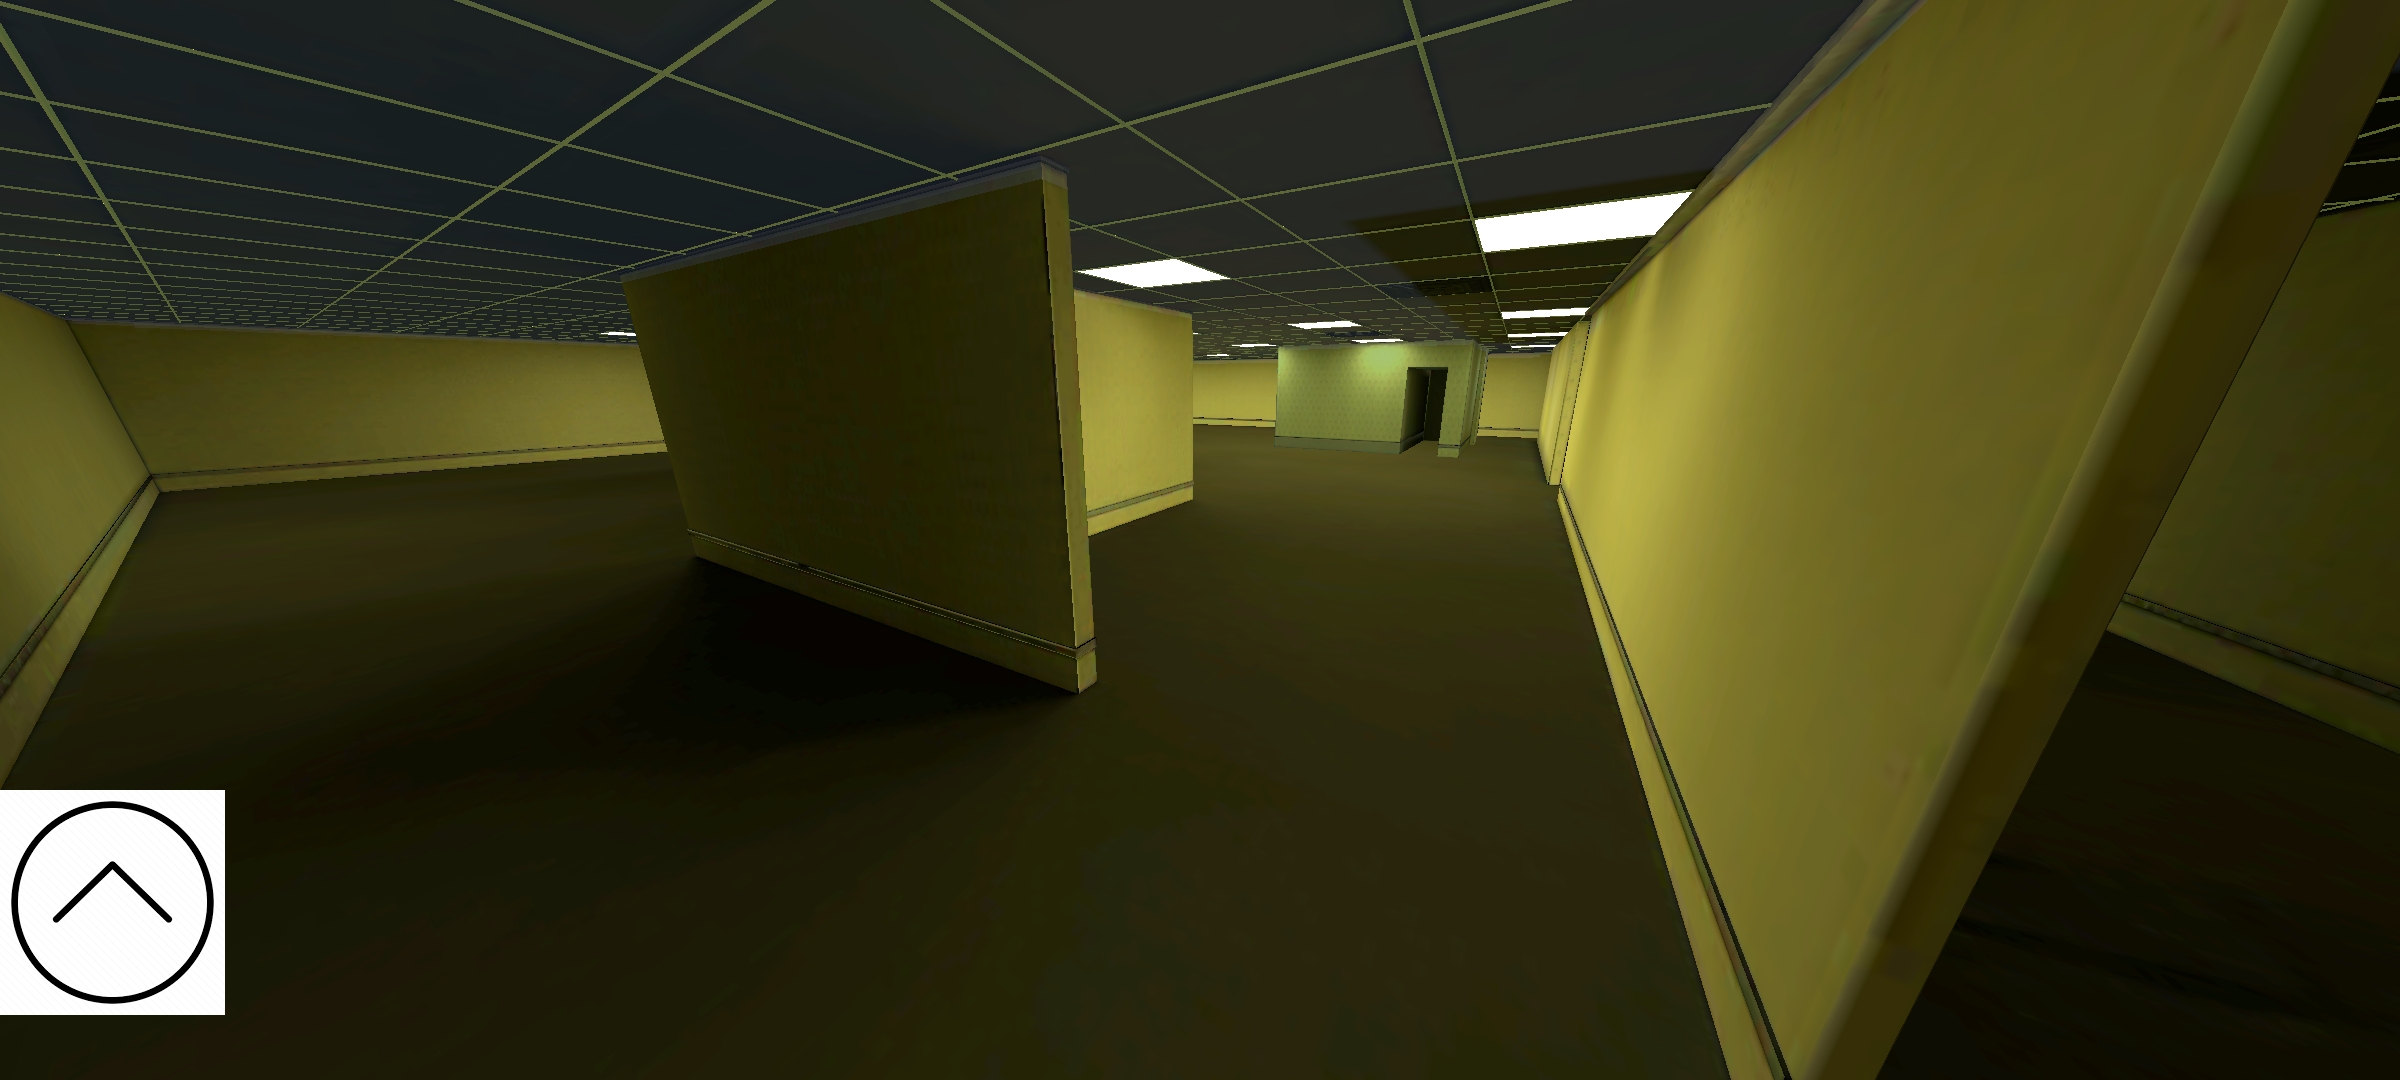 Noclipped into Backrooms - Roblox